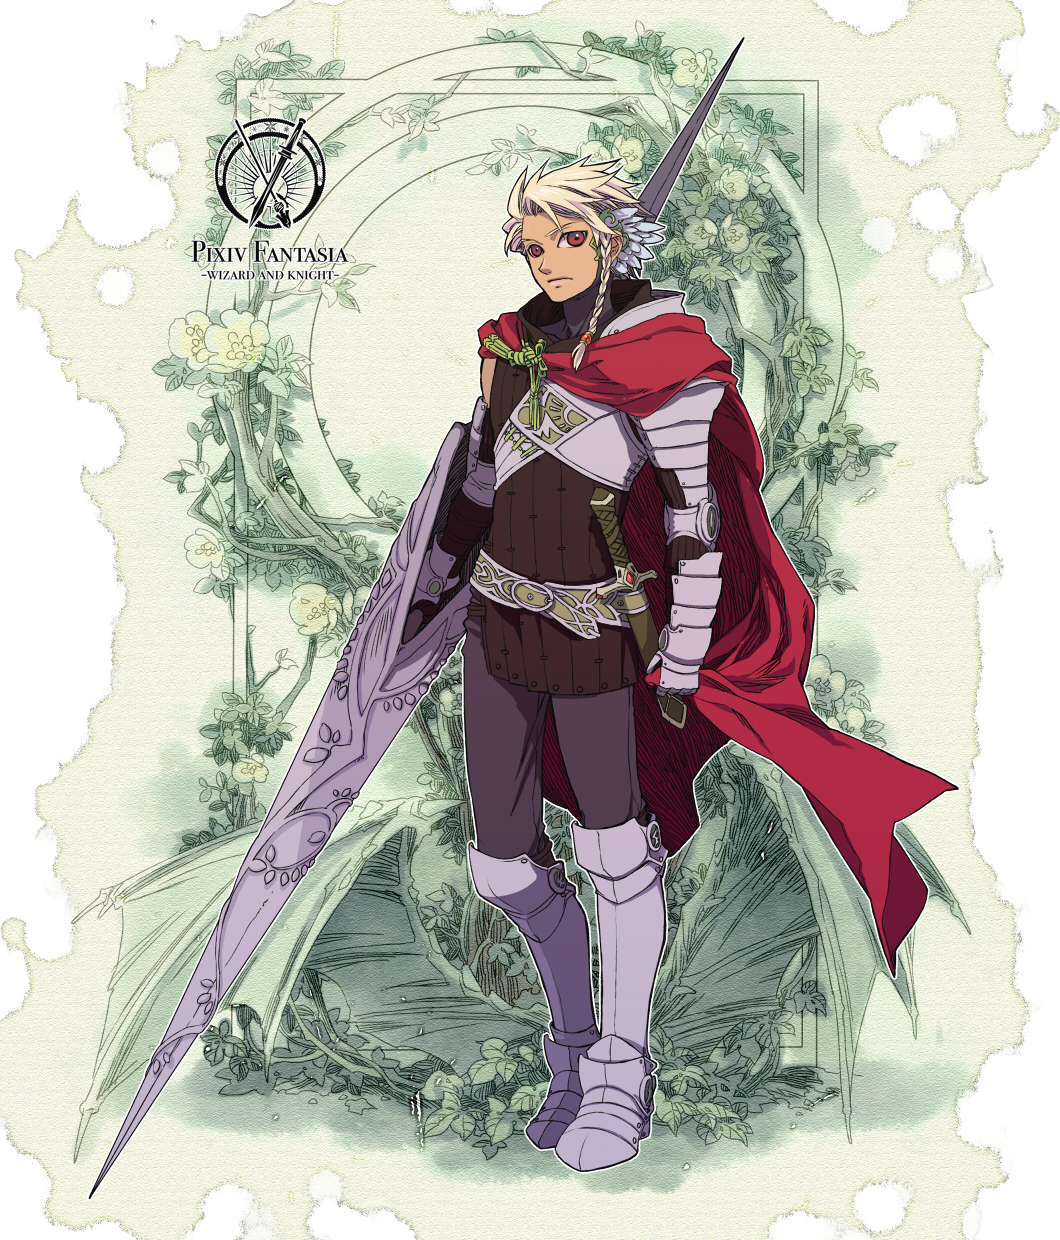 armor braid cape flower gauntlets greaves highres knight lance lizzydom male pixiv_fantasia pixiv_fantasia_wizard_and_knight polearm red_eyes solo weapon white_hair